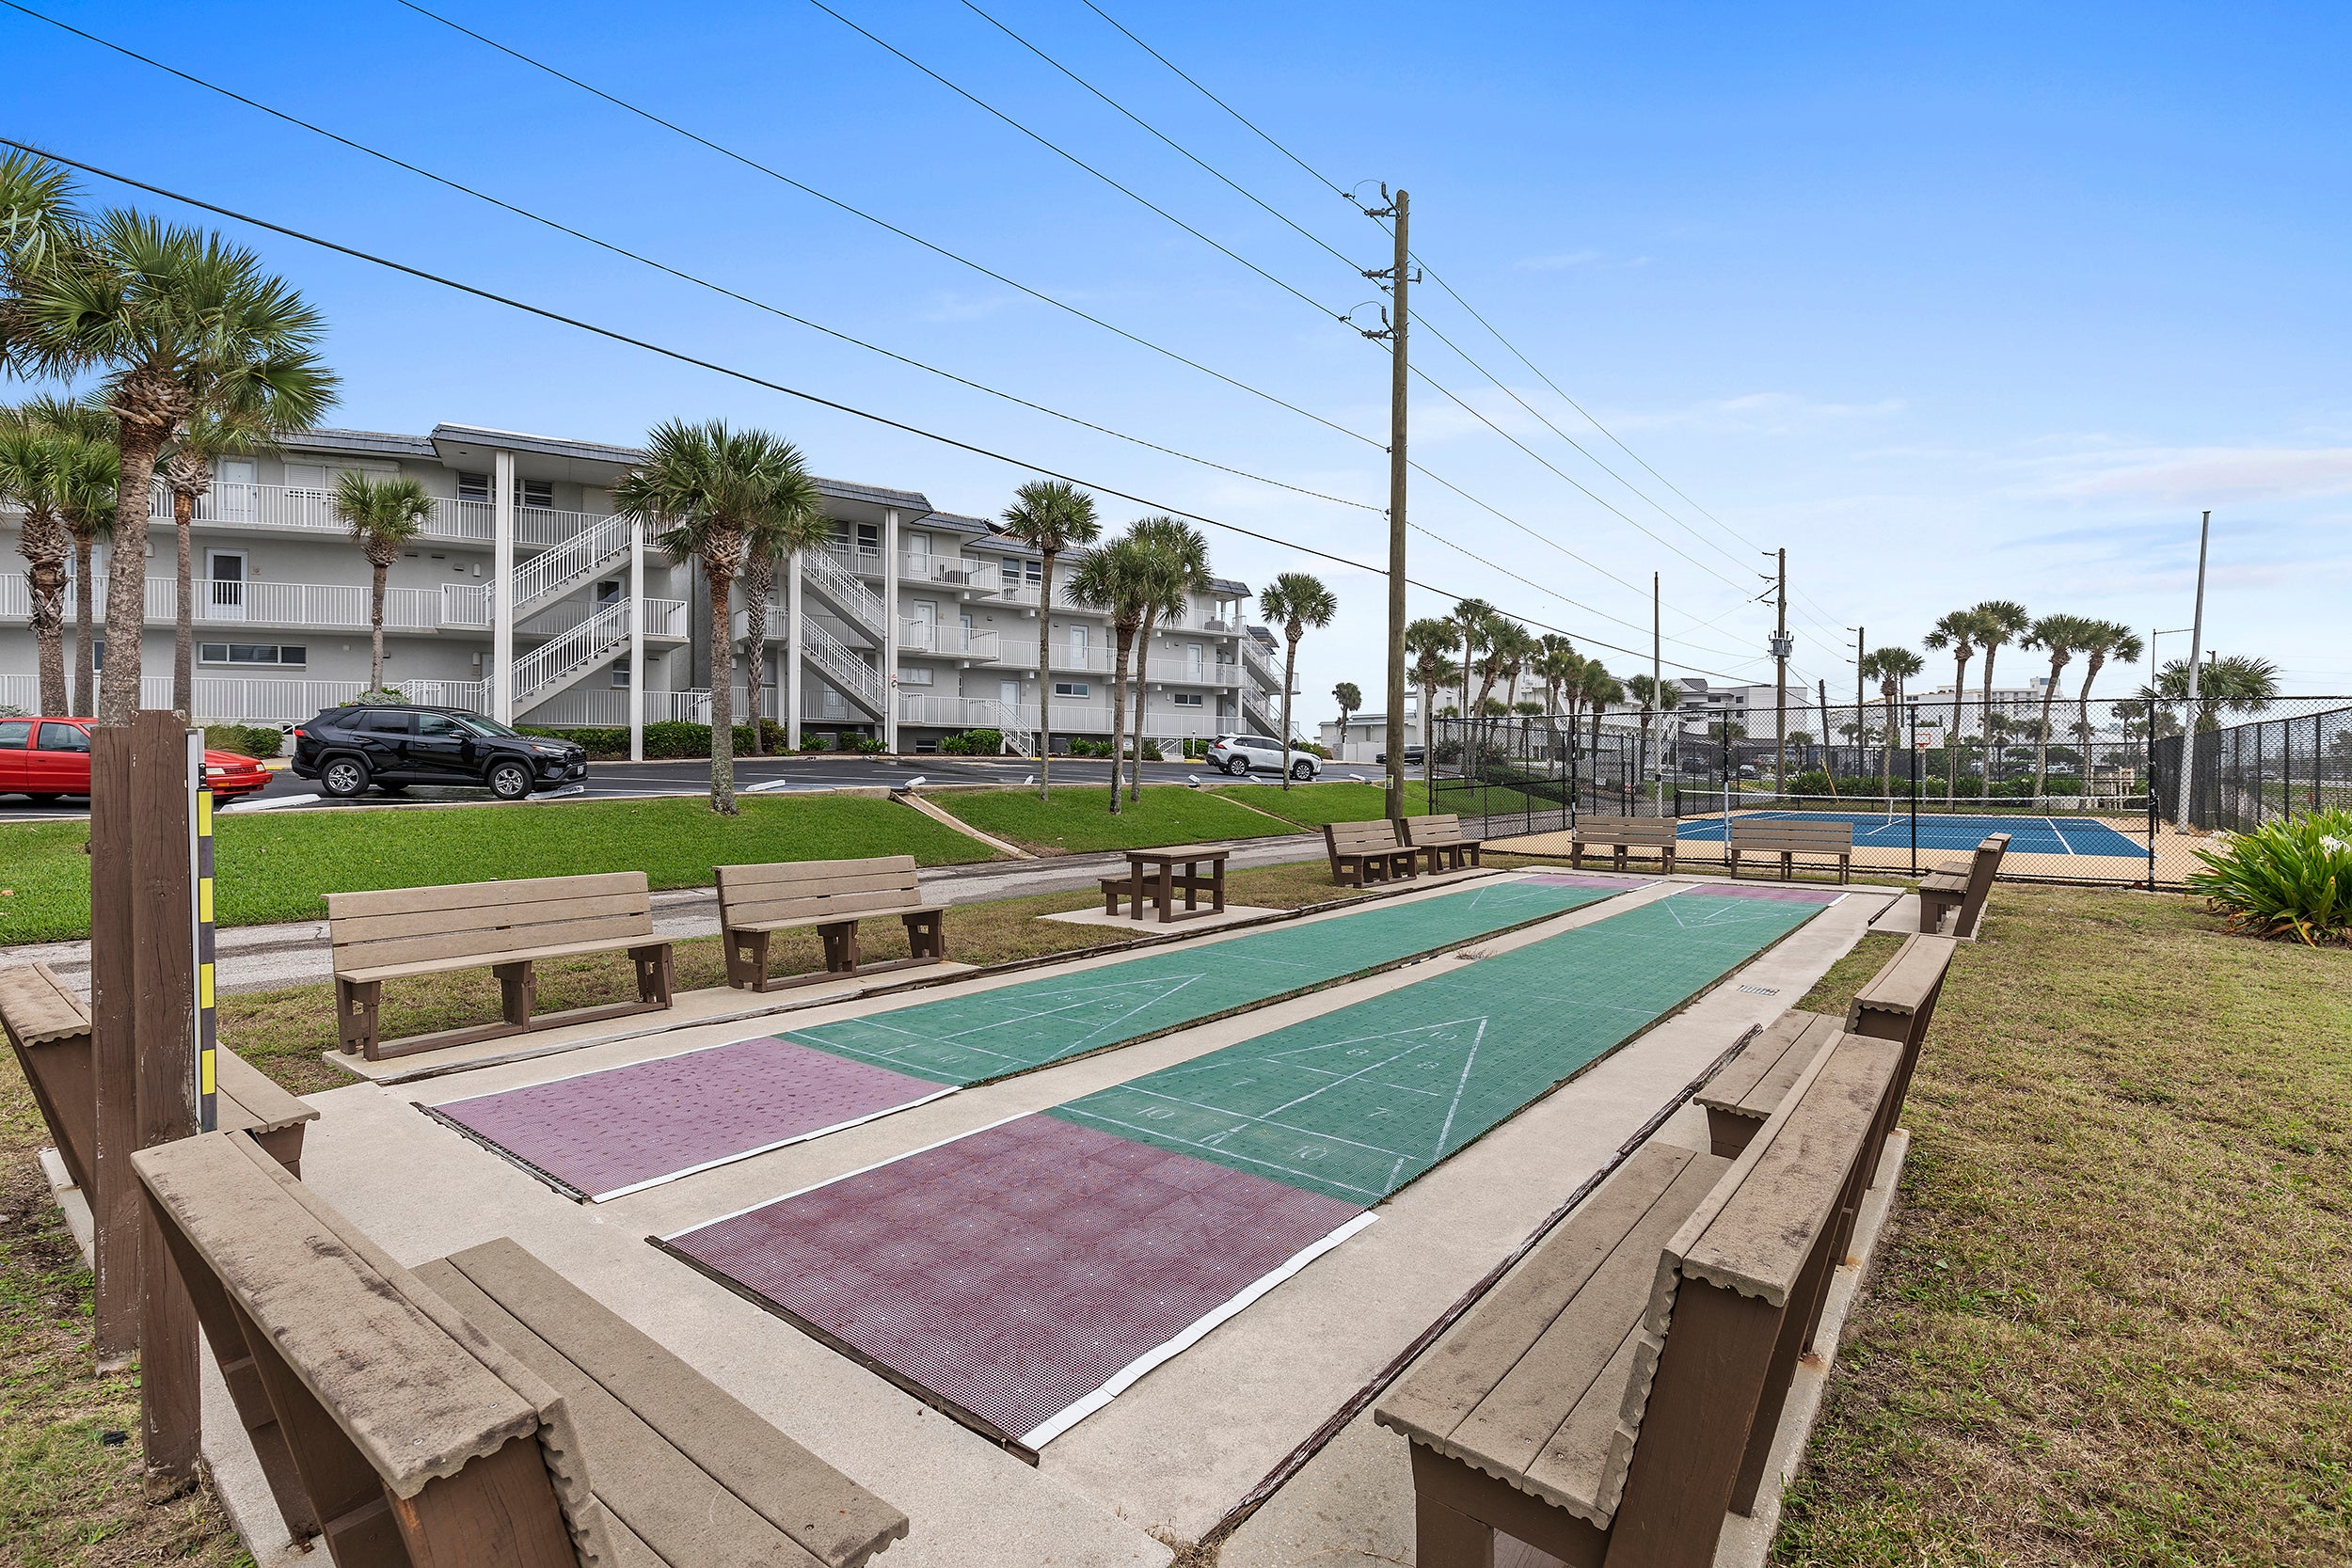 Shuffleboard Courts and complex